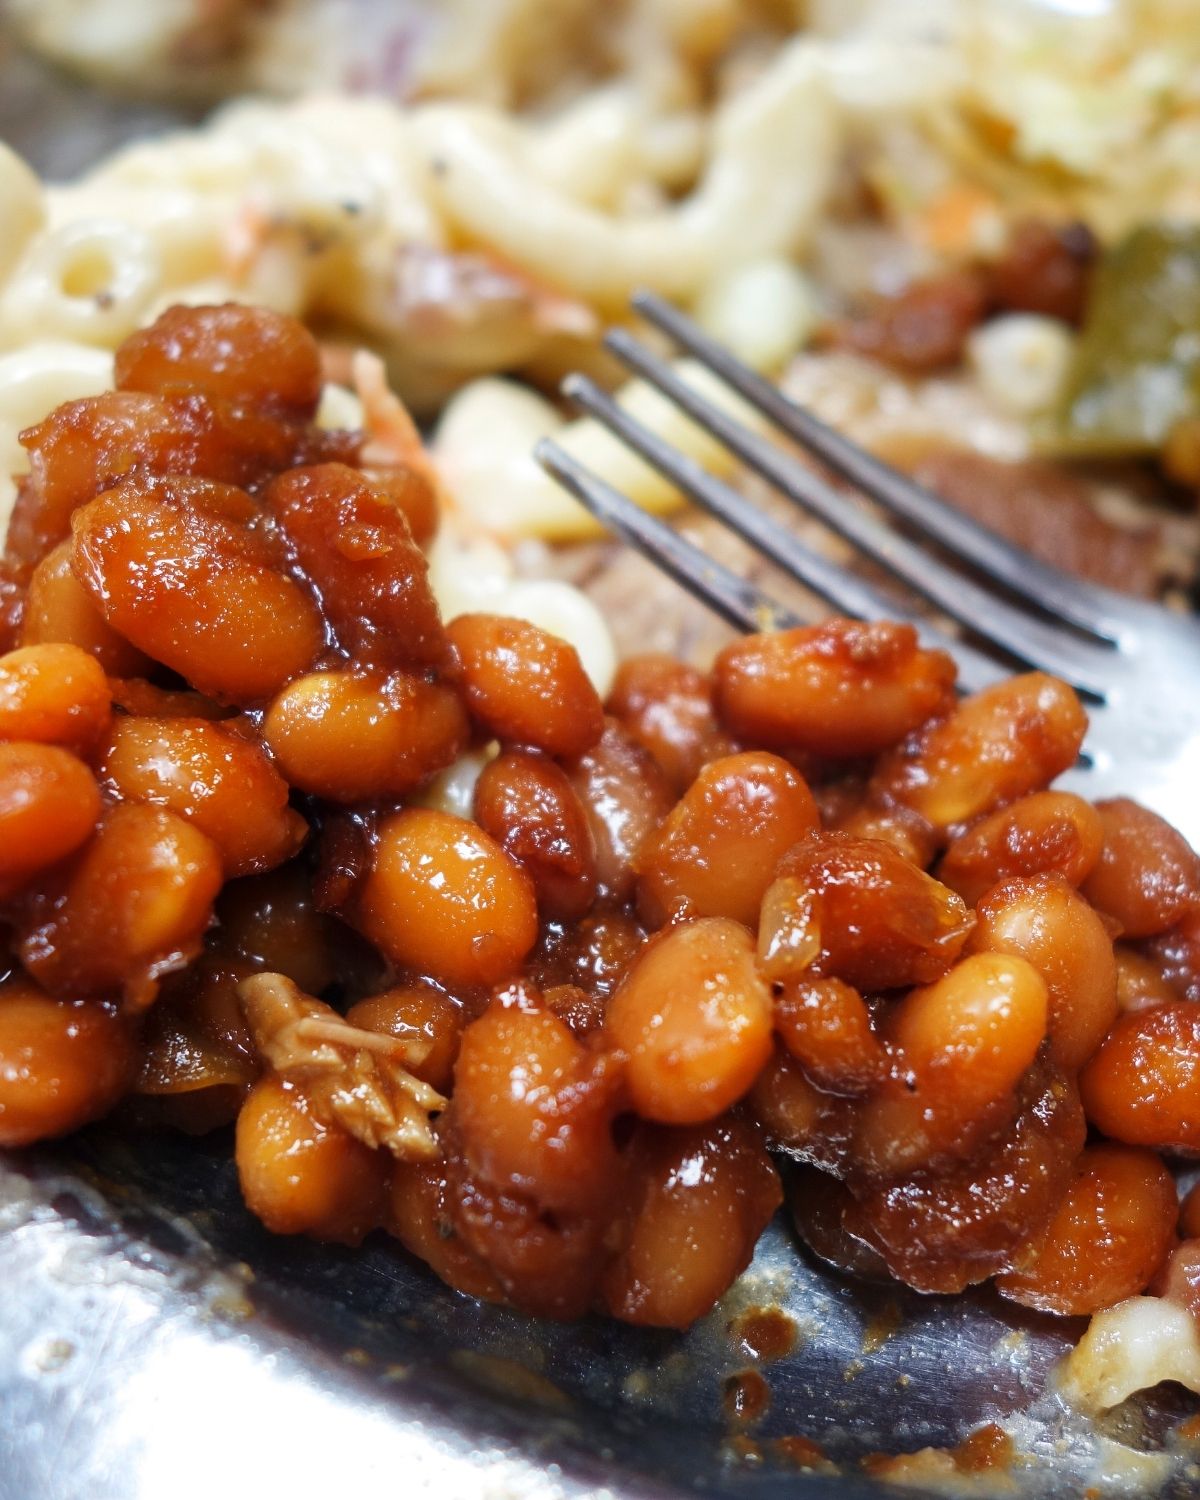 A fork in a side of beans.